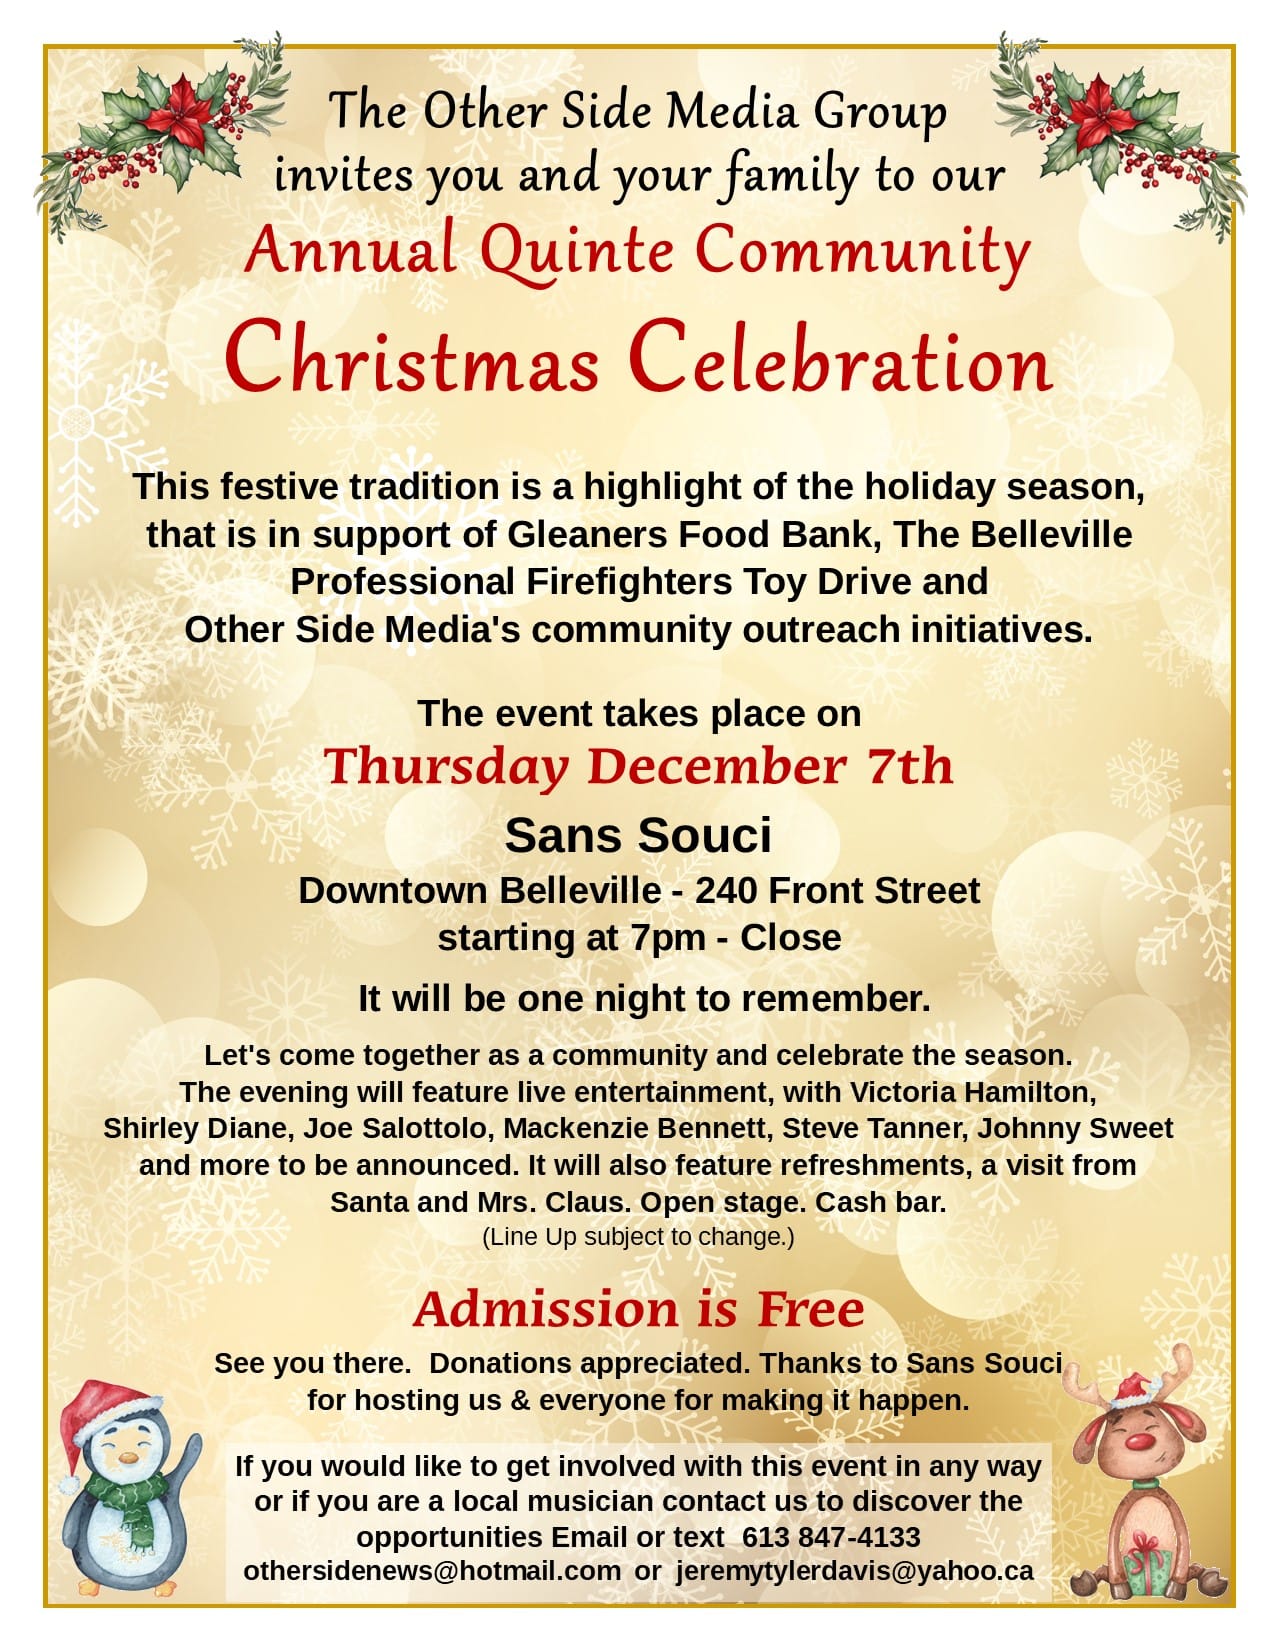 Quinte Community Christmas Celebration by Other Side - Bay of Quinte Region